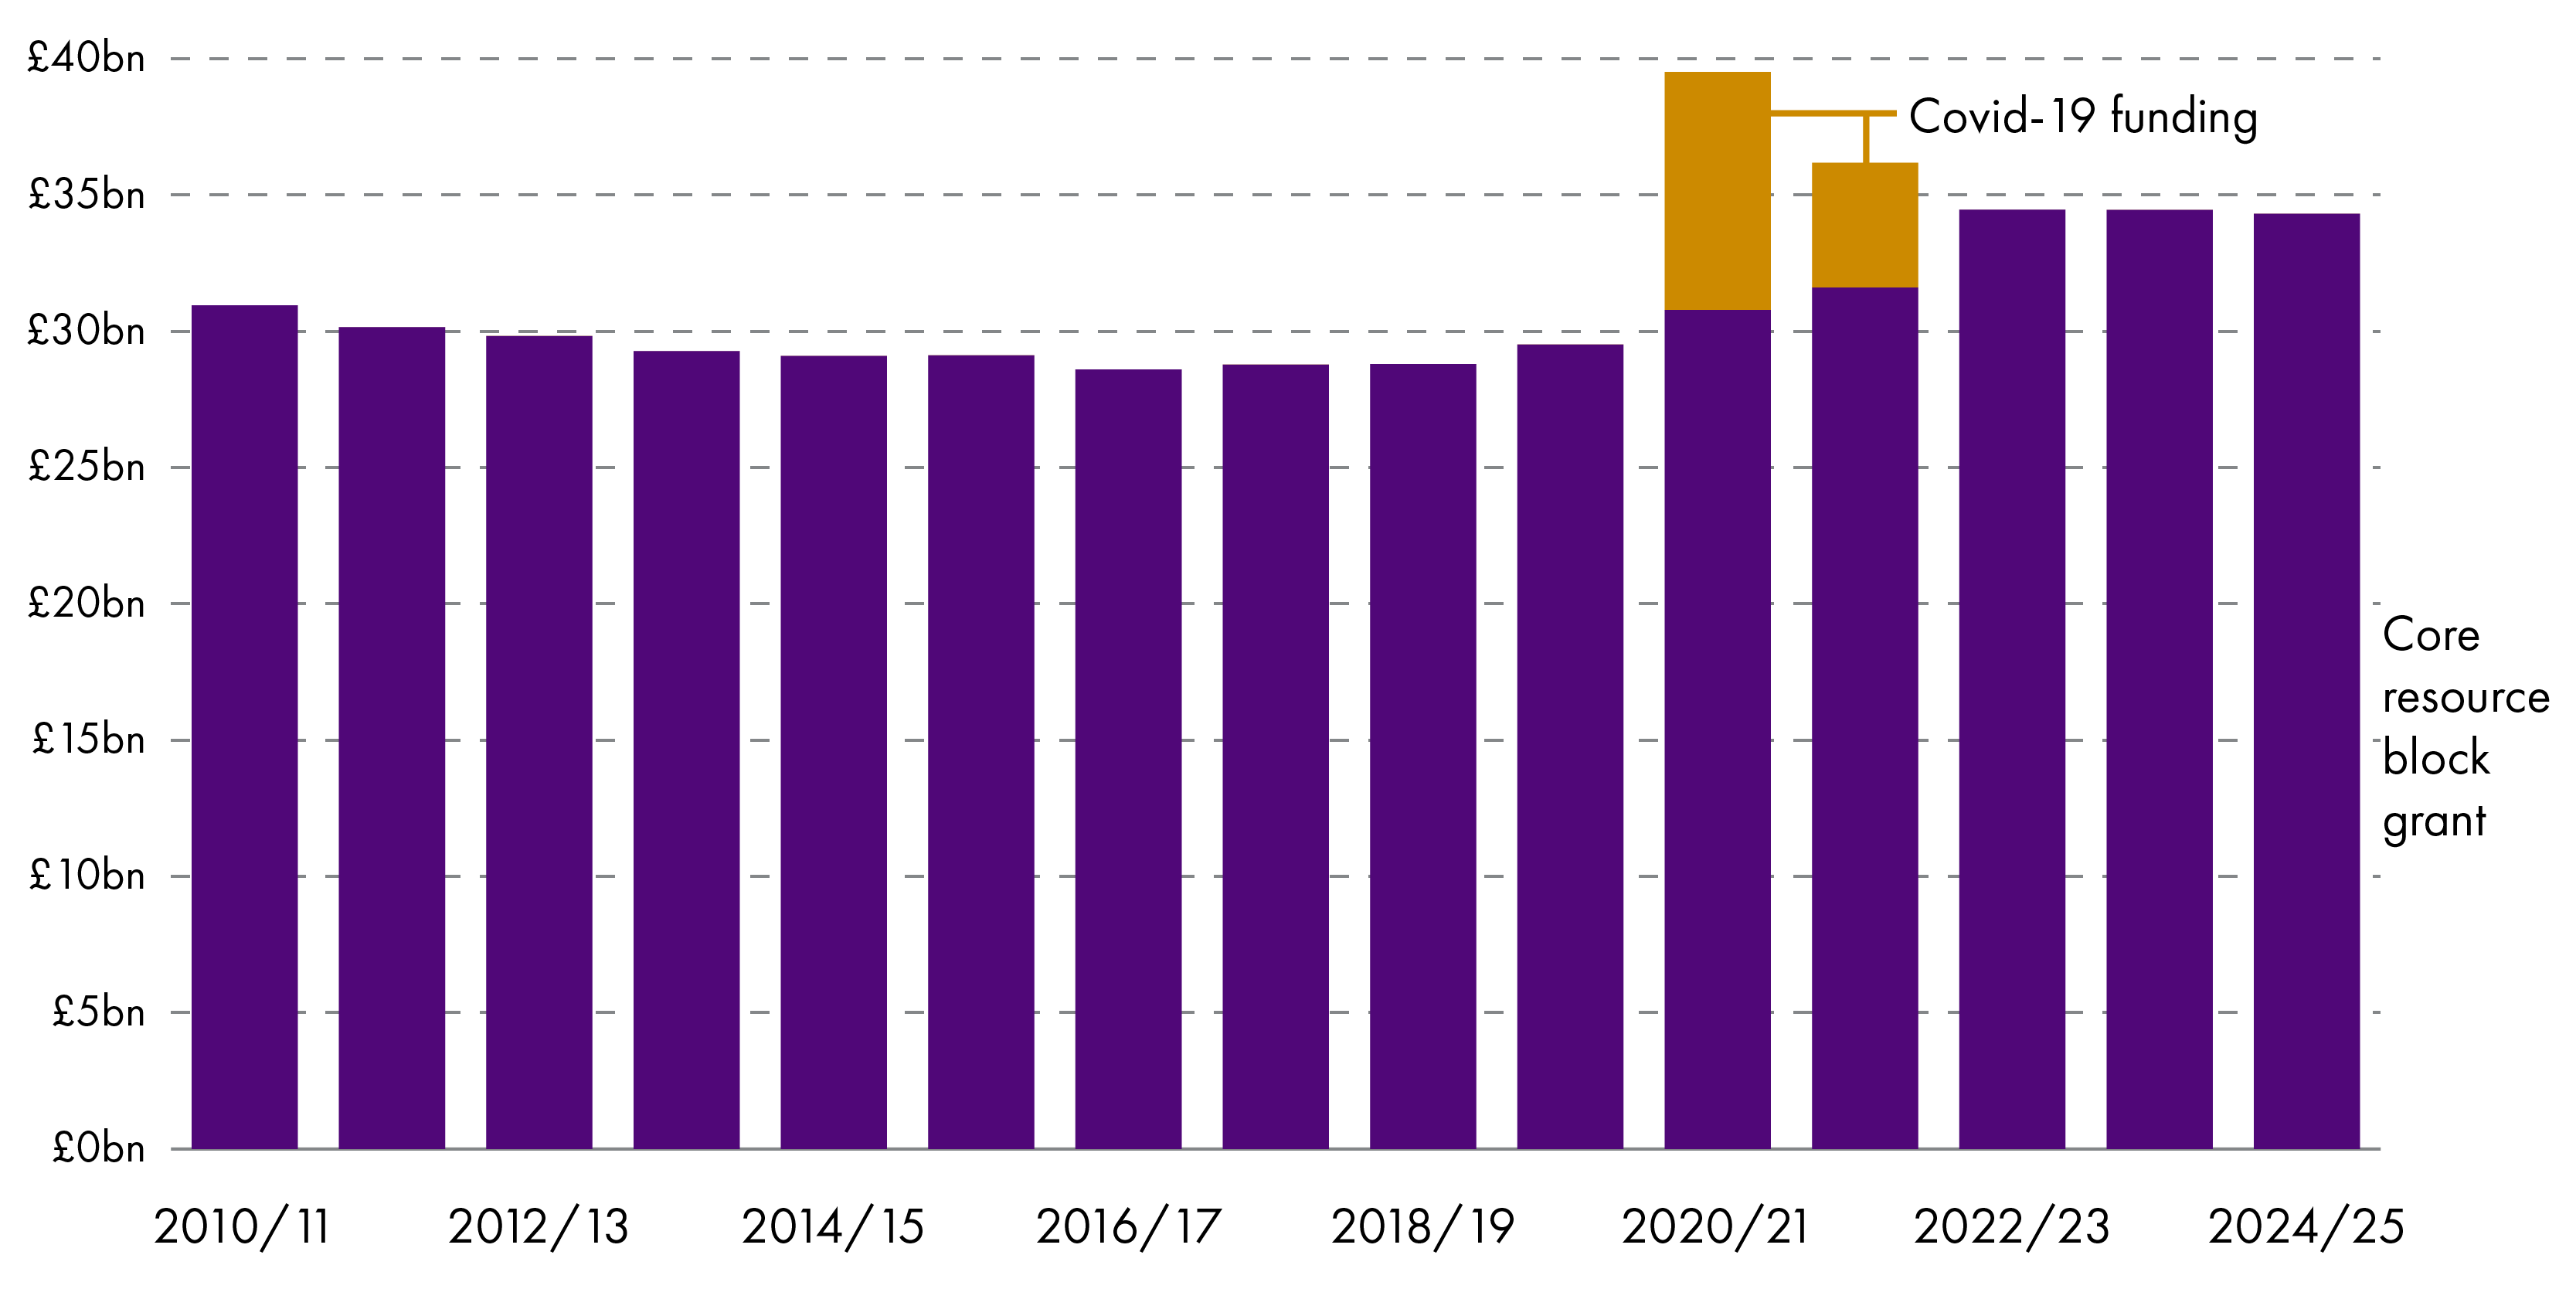 Figure 4 shows the Scottish Government's core funding from 2010-11 to 2024-25 with the additional funding received for Covid-19 in 2020-21 and 2021-22.